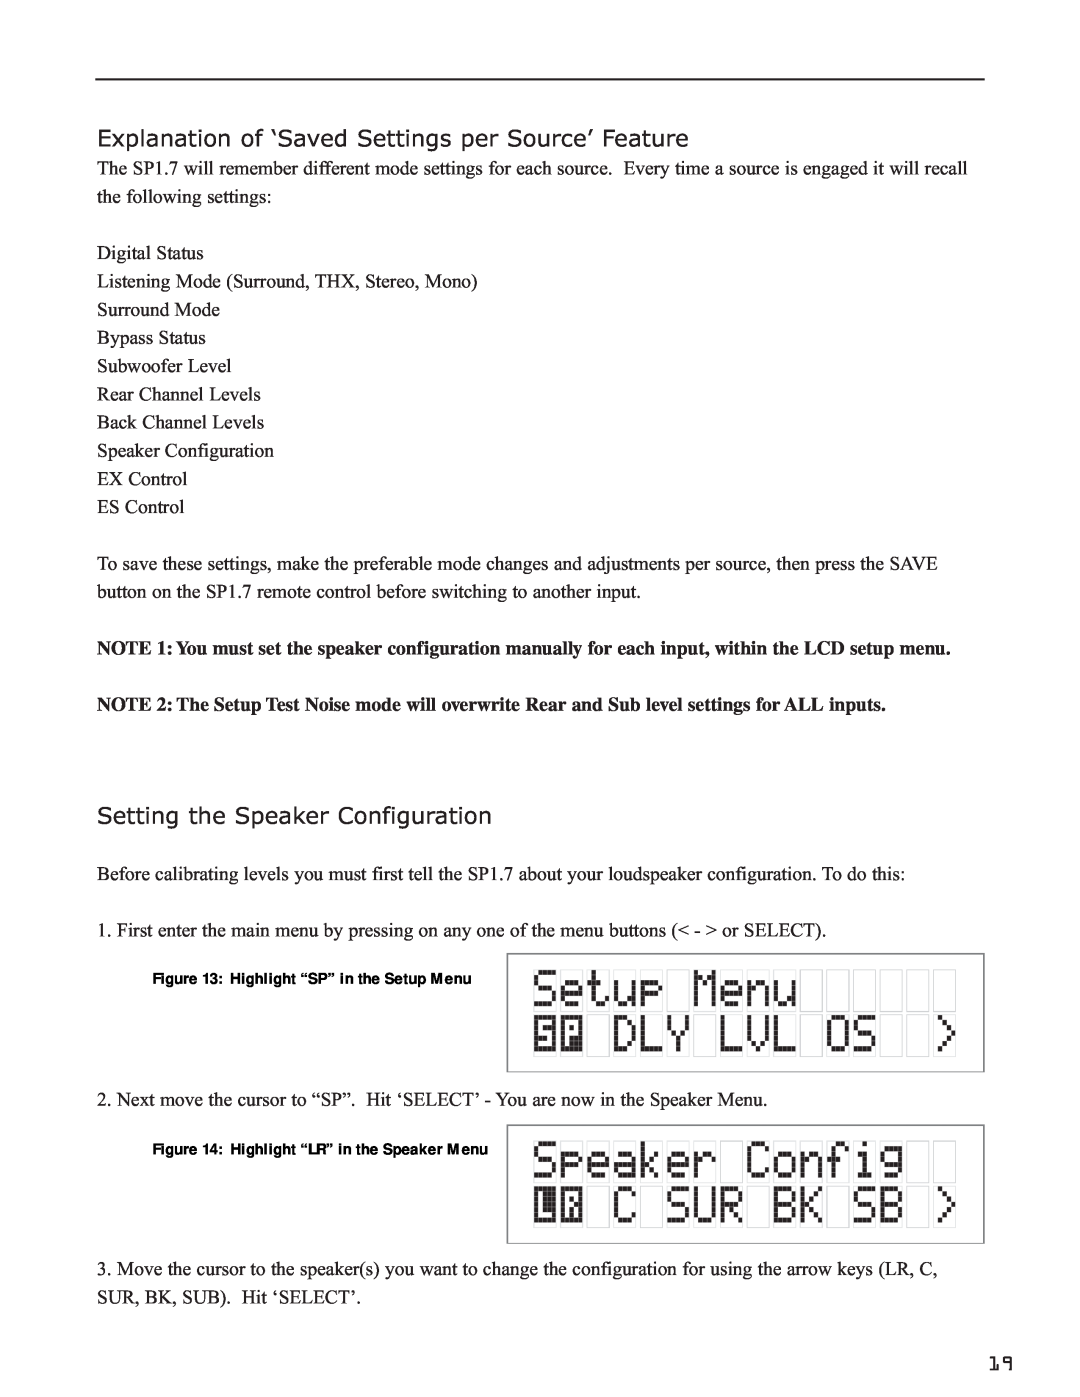 Bryston SP1.7 manual Setting the Speaker Configuration 